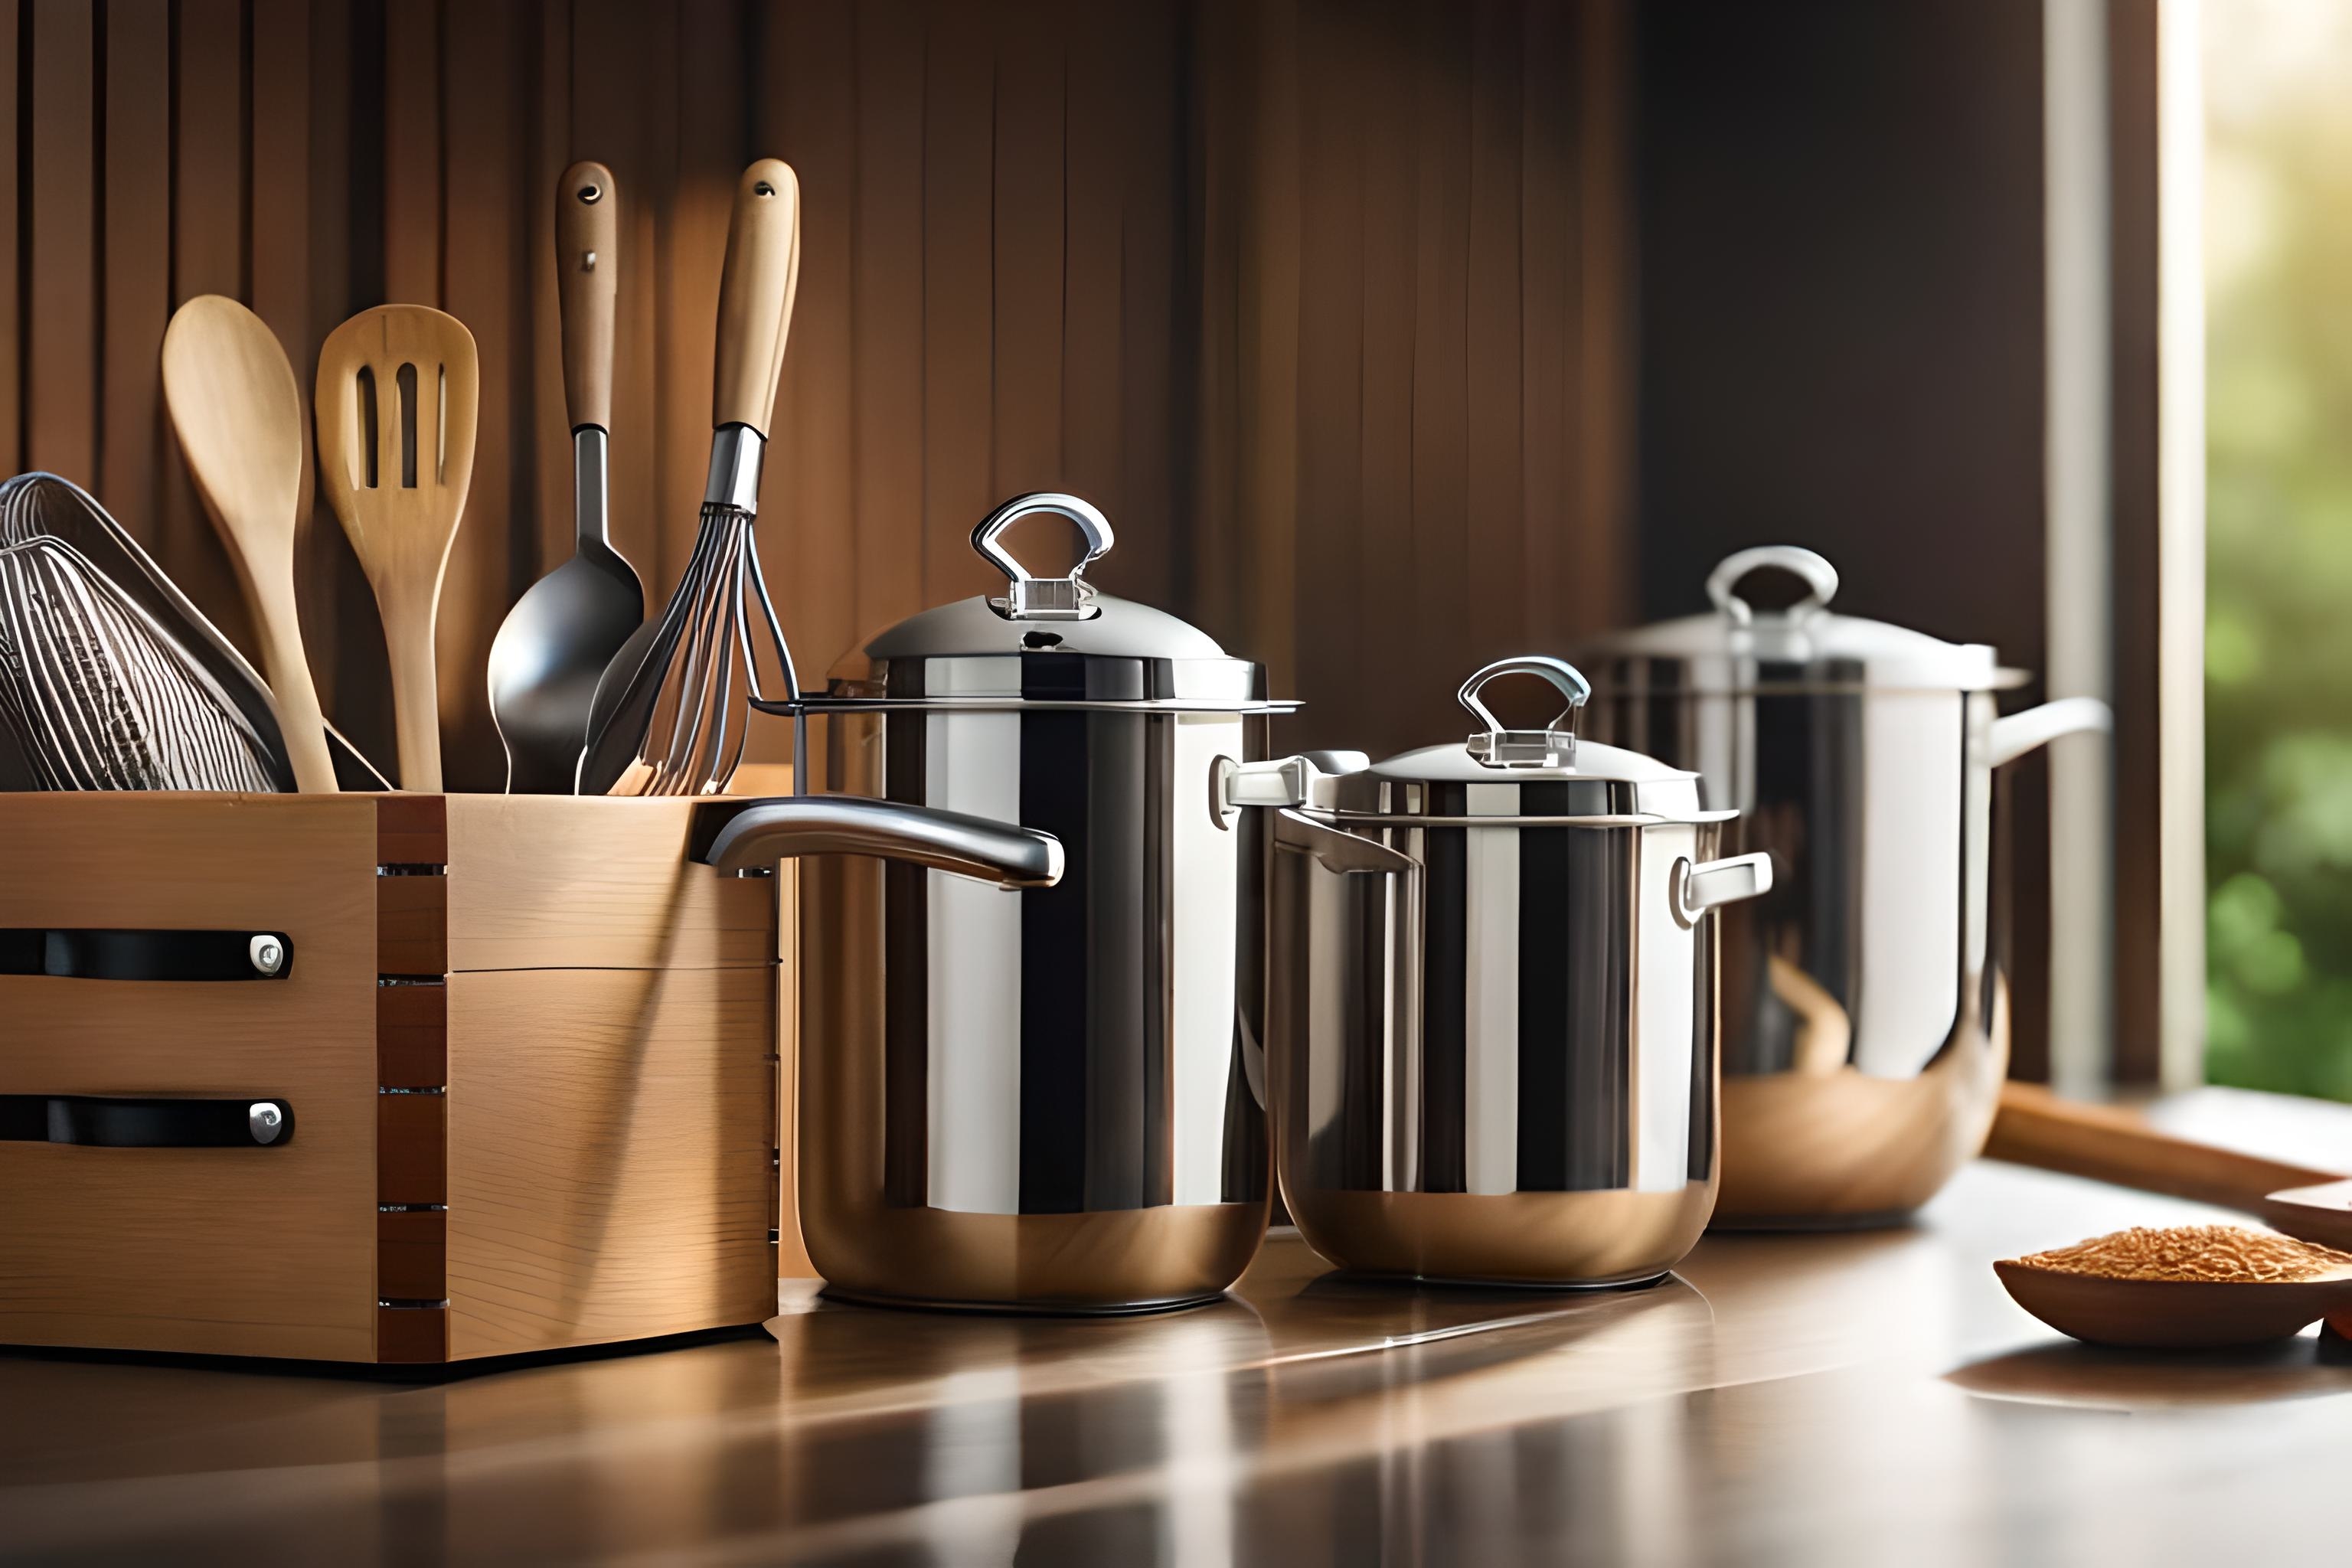 Learn Cookware Sets with Innovative Heat Distribution Technology